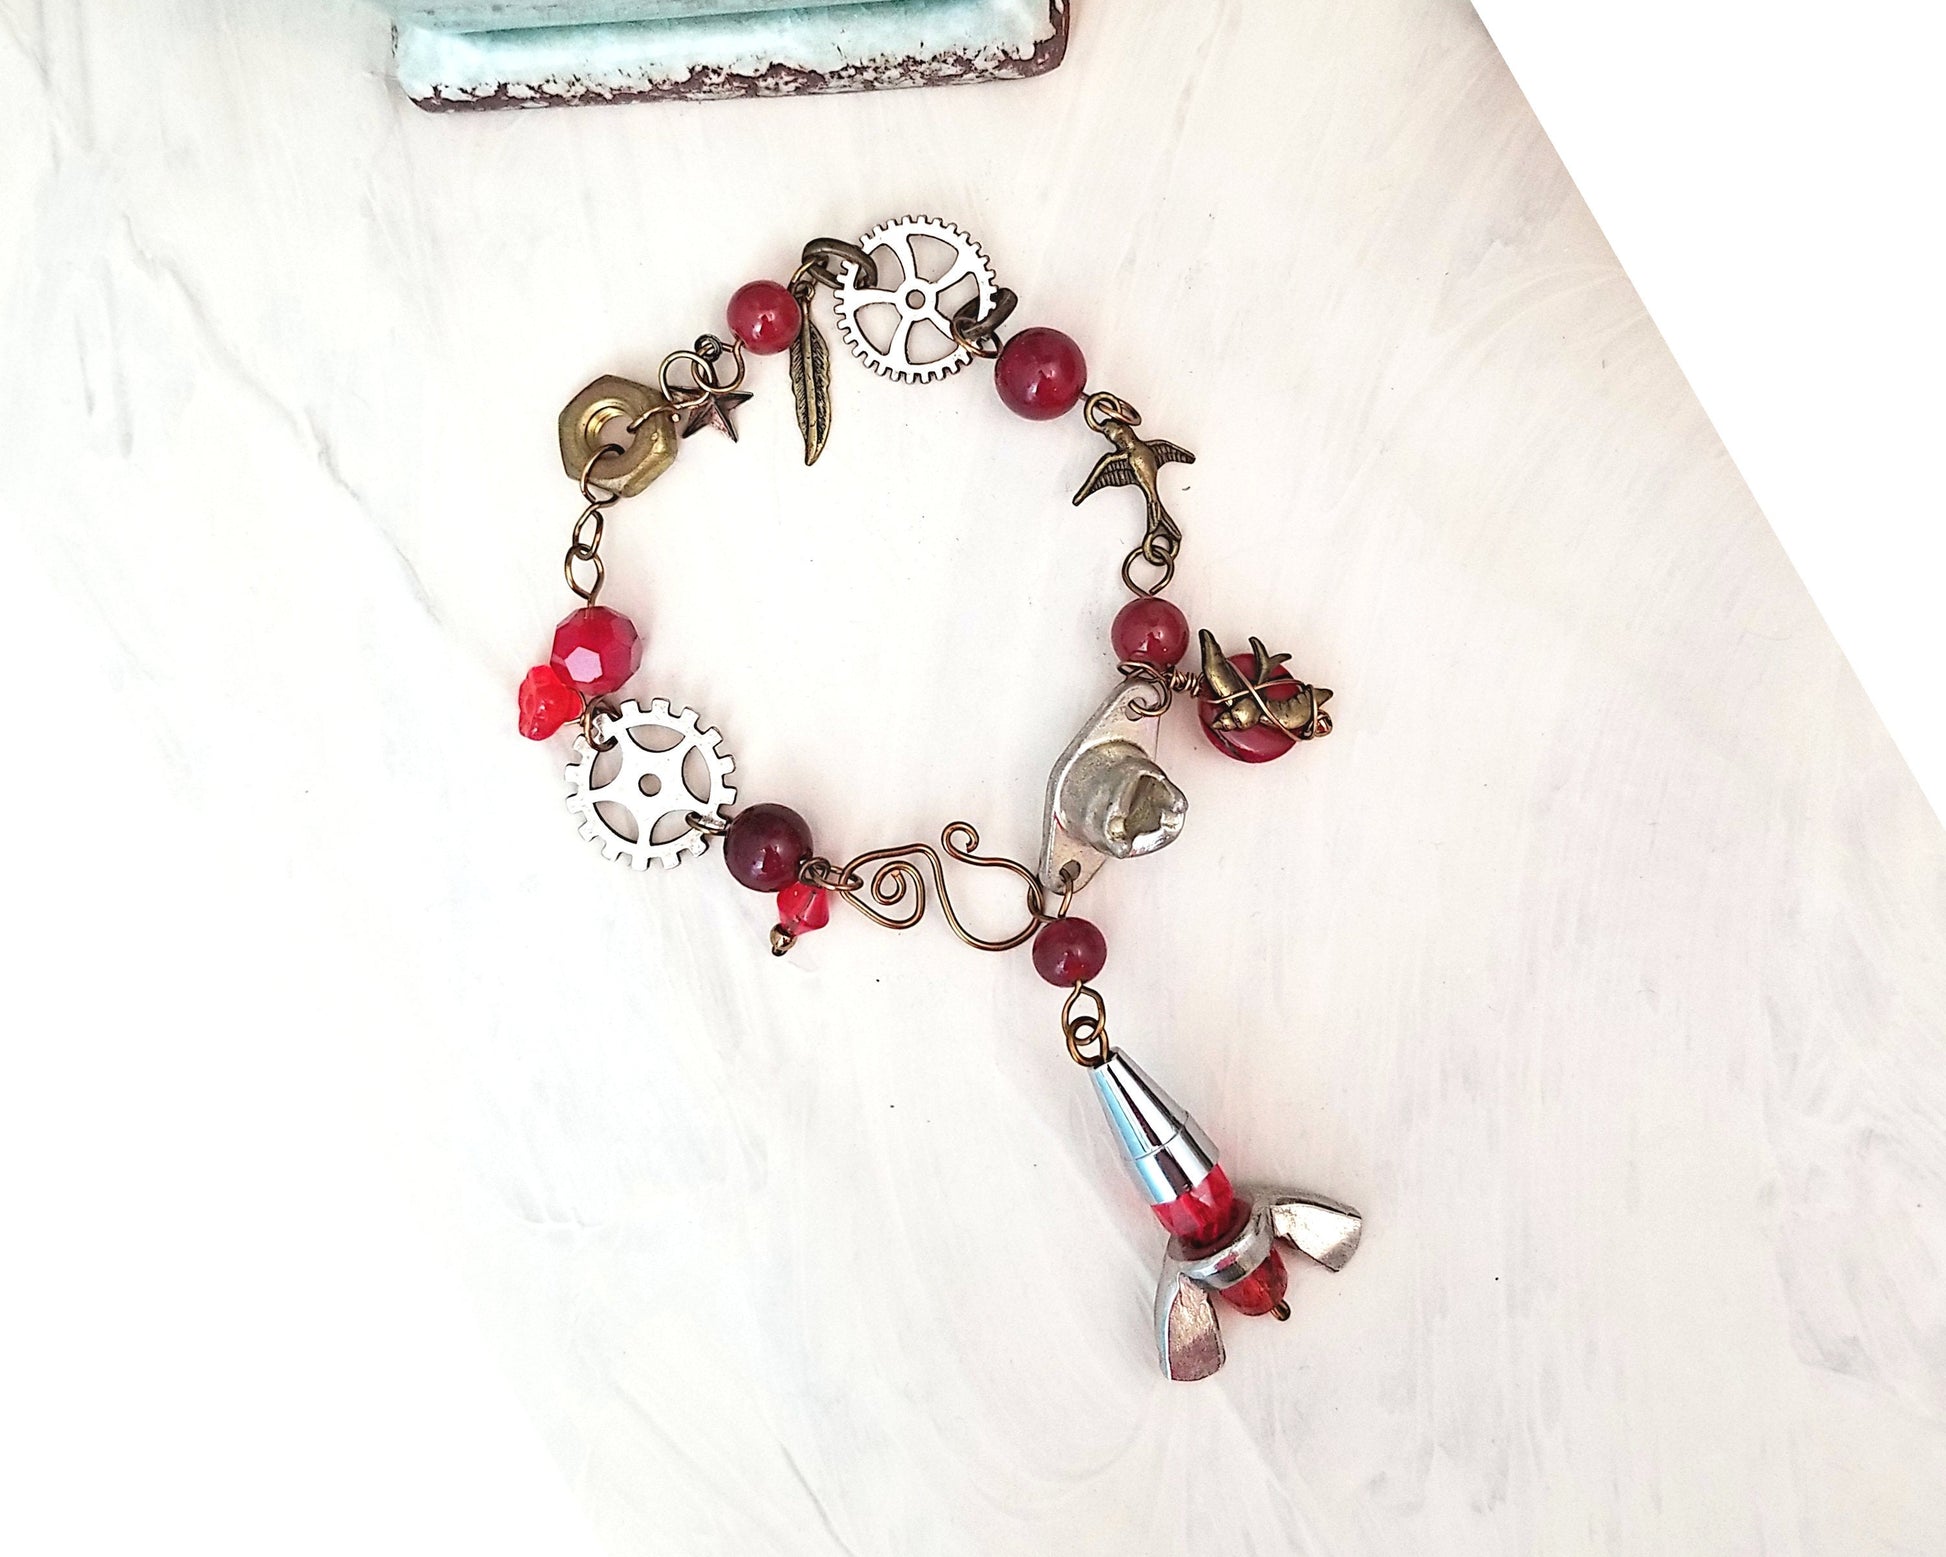 Steampunk Industrial Rocket Bracelet in Red with Glass Beads and Real Hardware